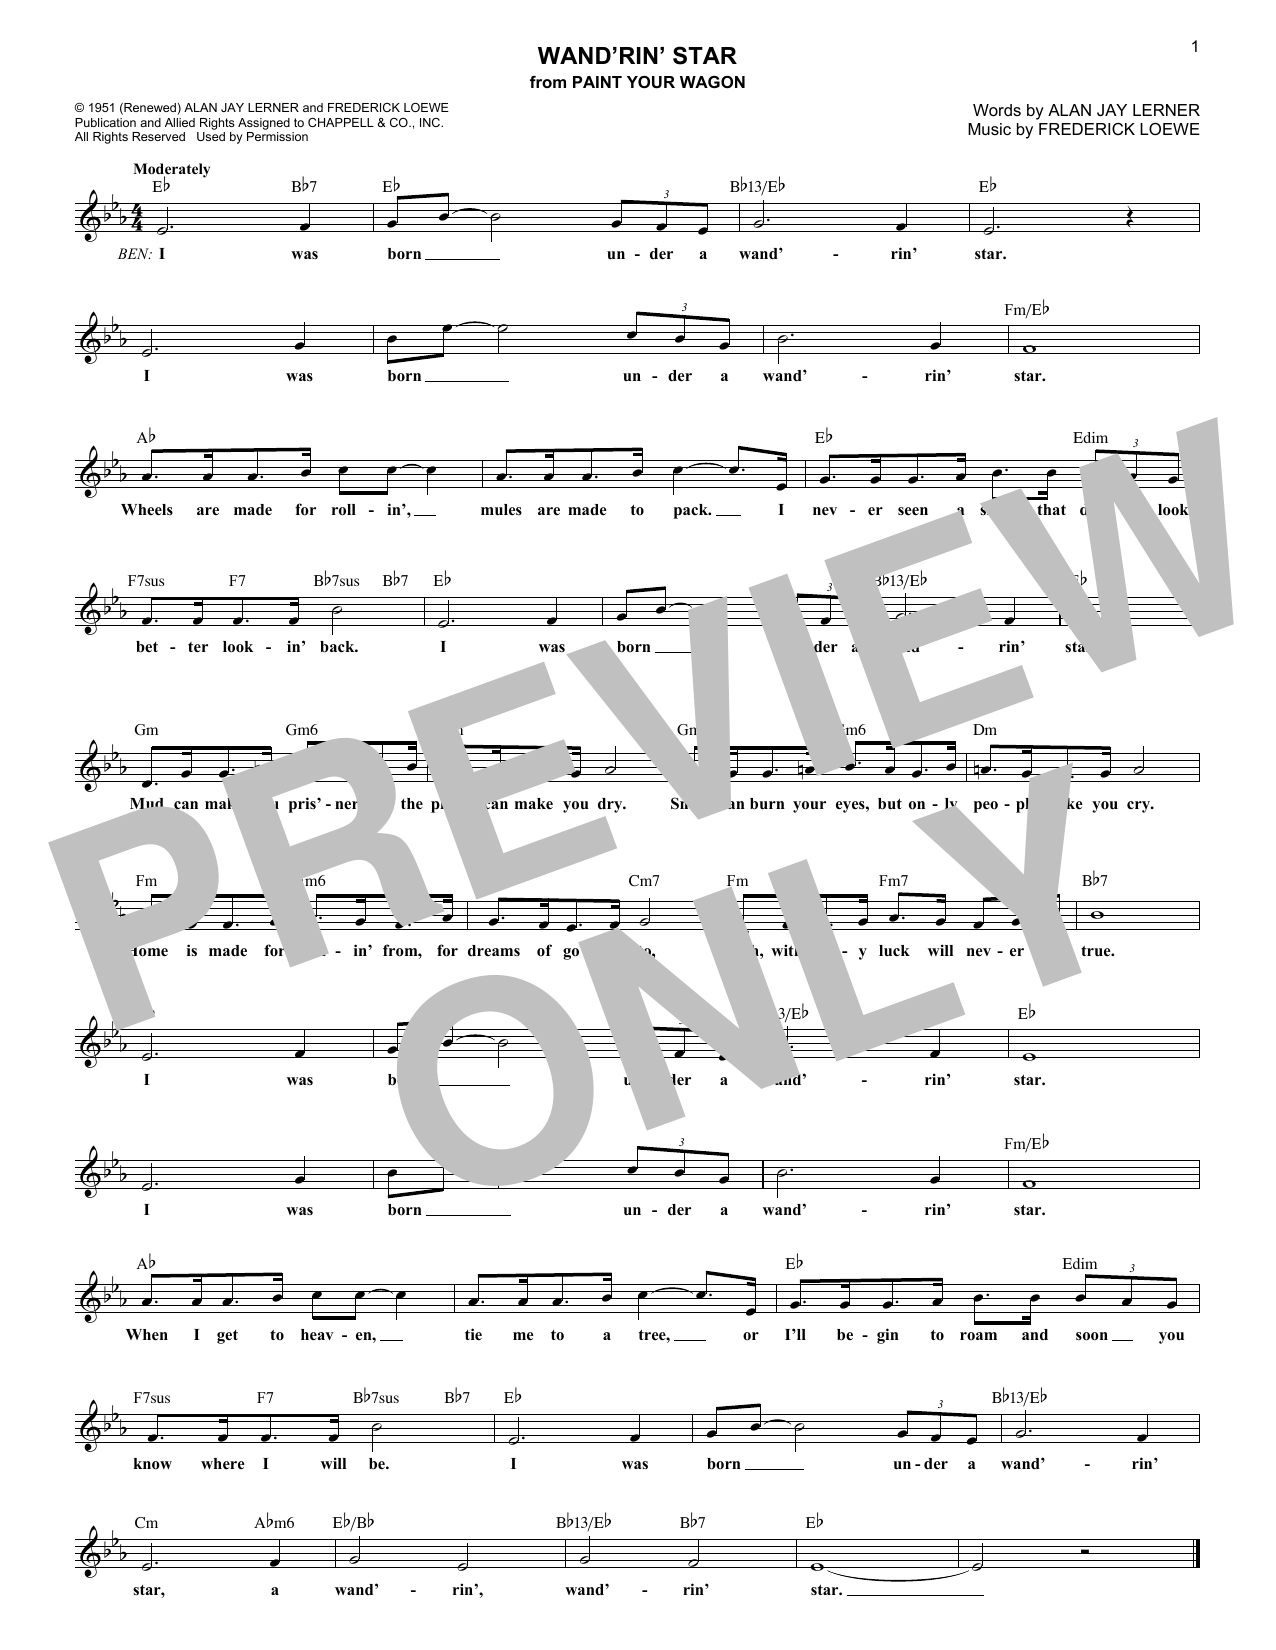 Download Lerner & Loewe Wand'rin' Star (from Paint Your Wagon) Sheet Music